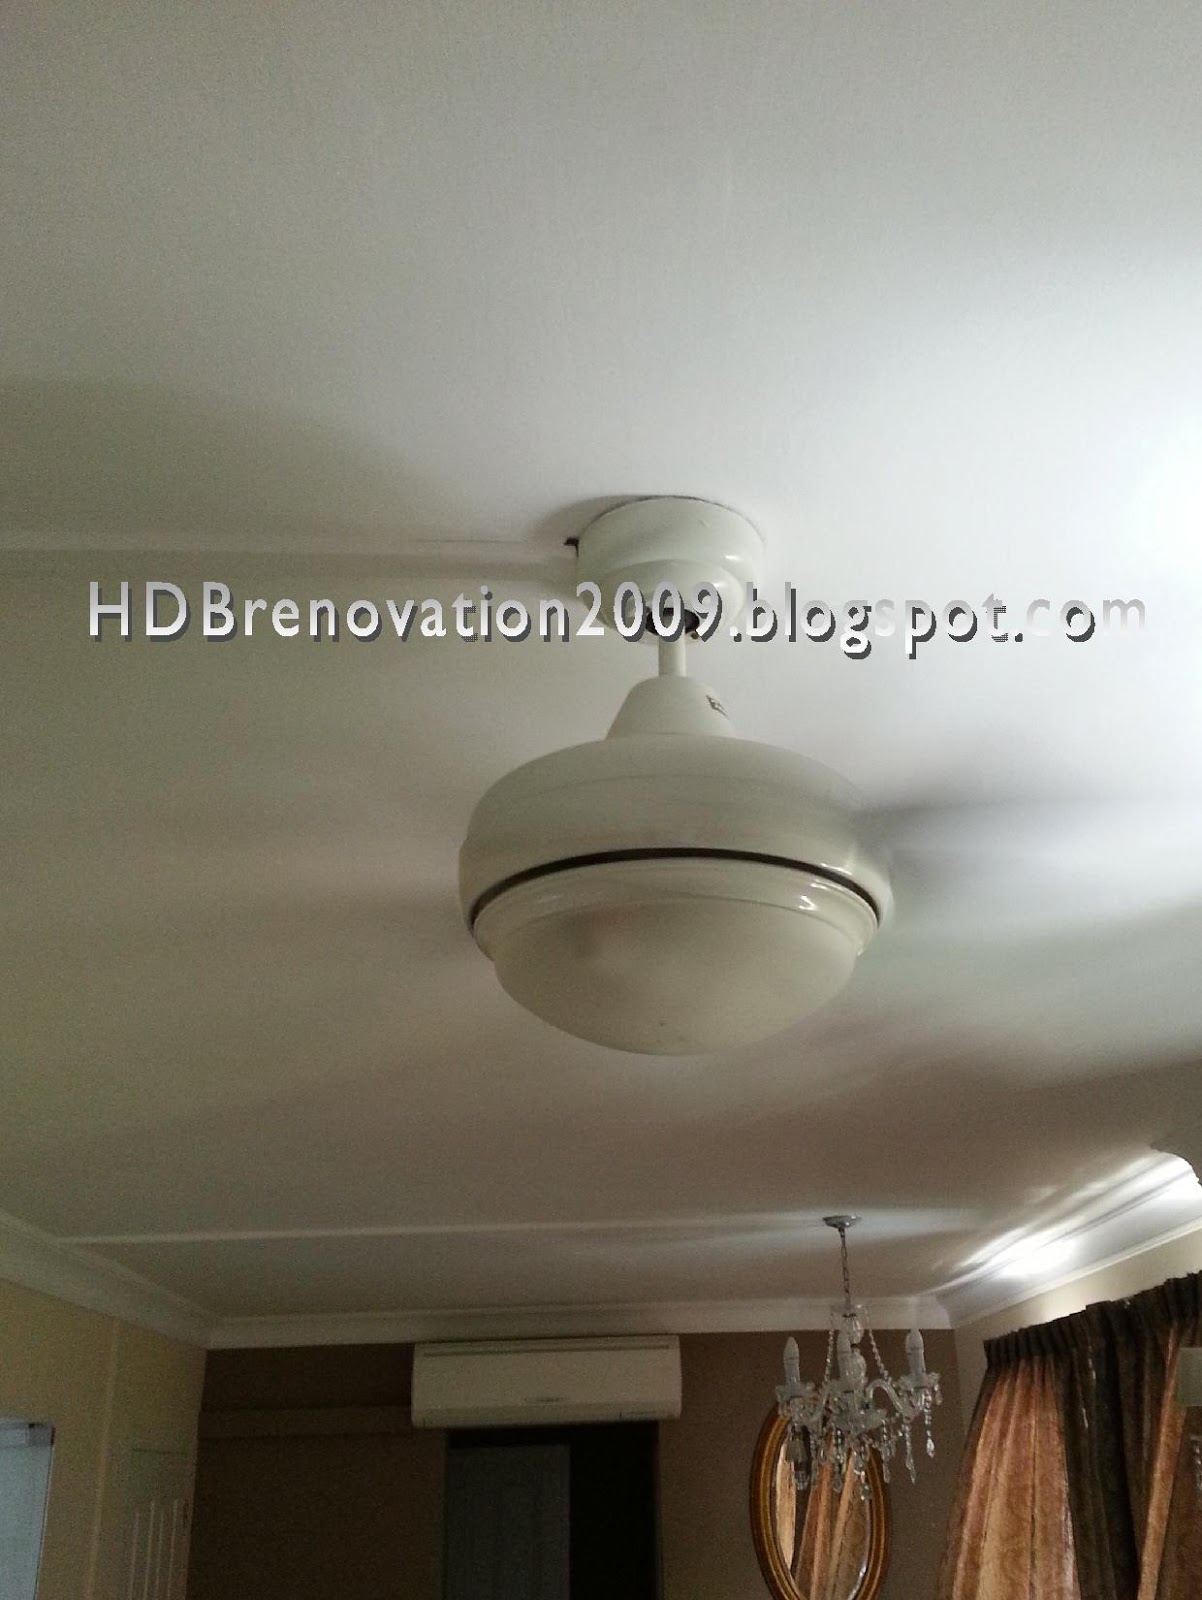 Our HDB Flat Renovation in 2009: How to choose a ceiling fan